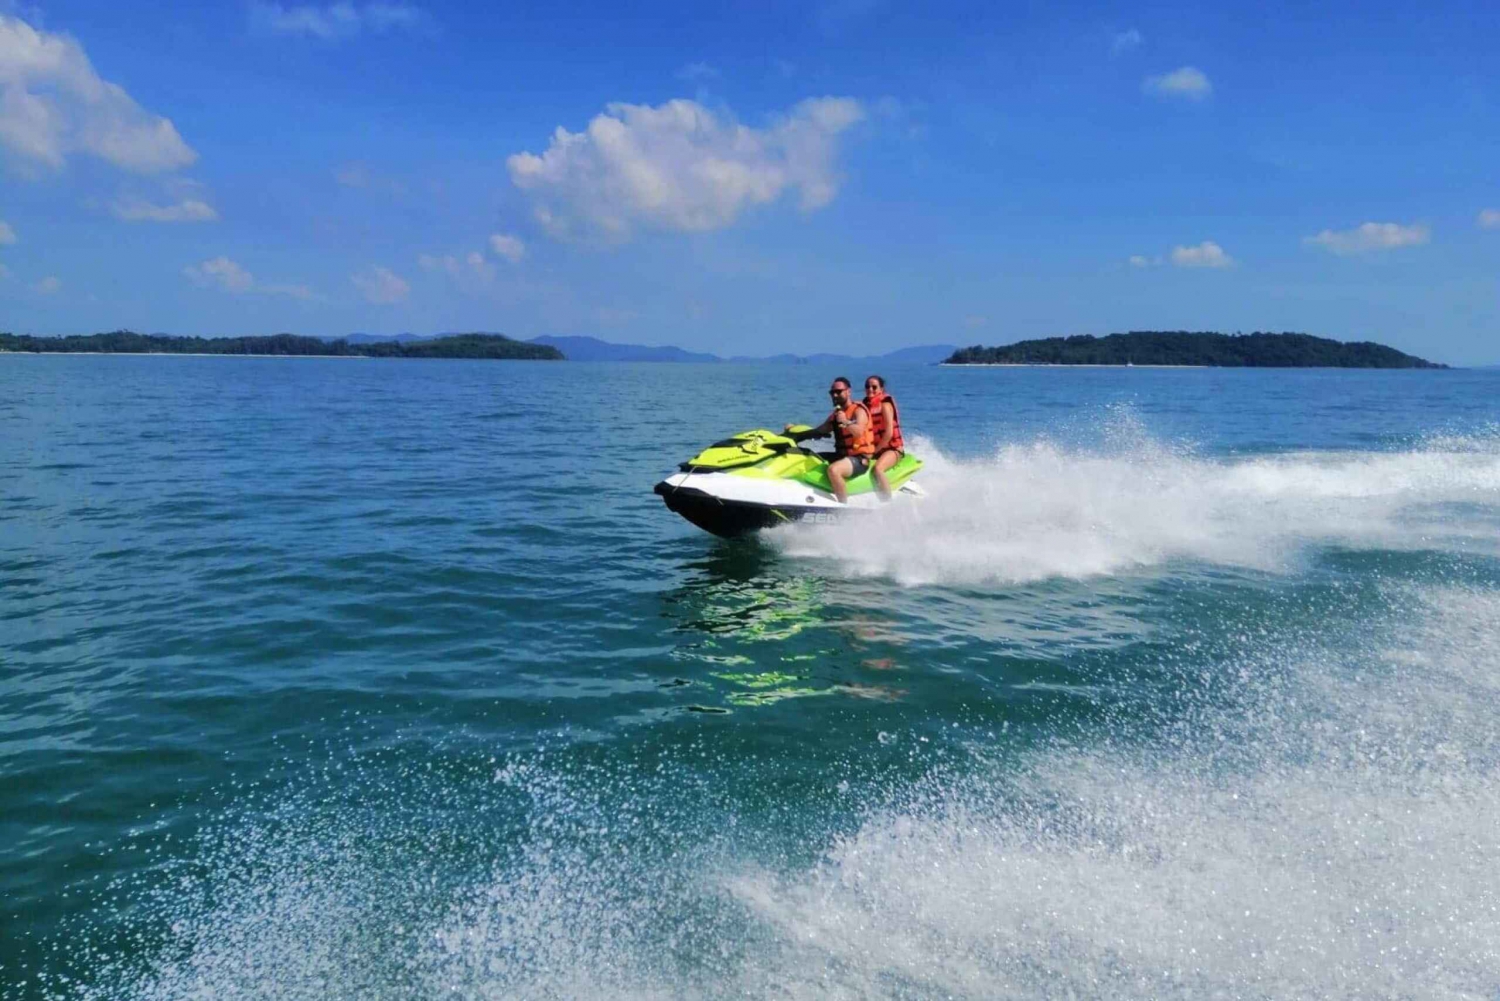 Phuket: 6 or 7-Island Jet Ski Tour with Lunch and Transfer